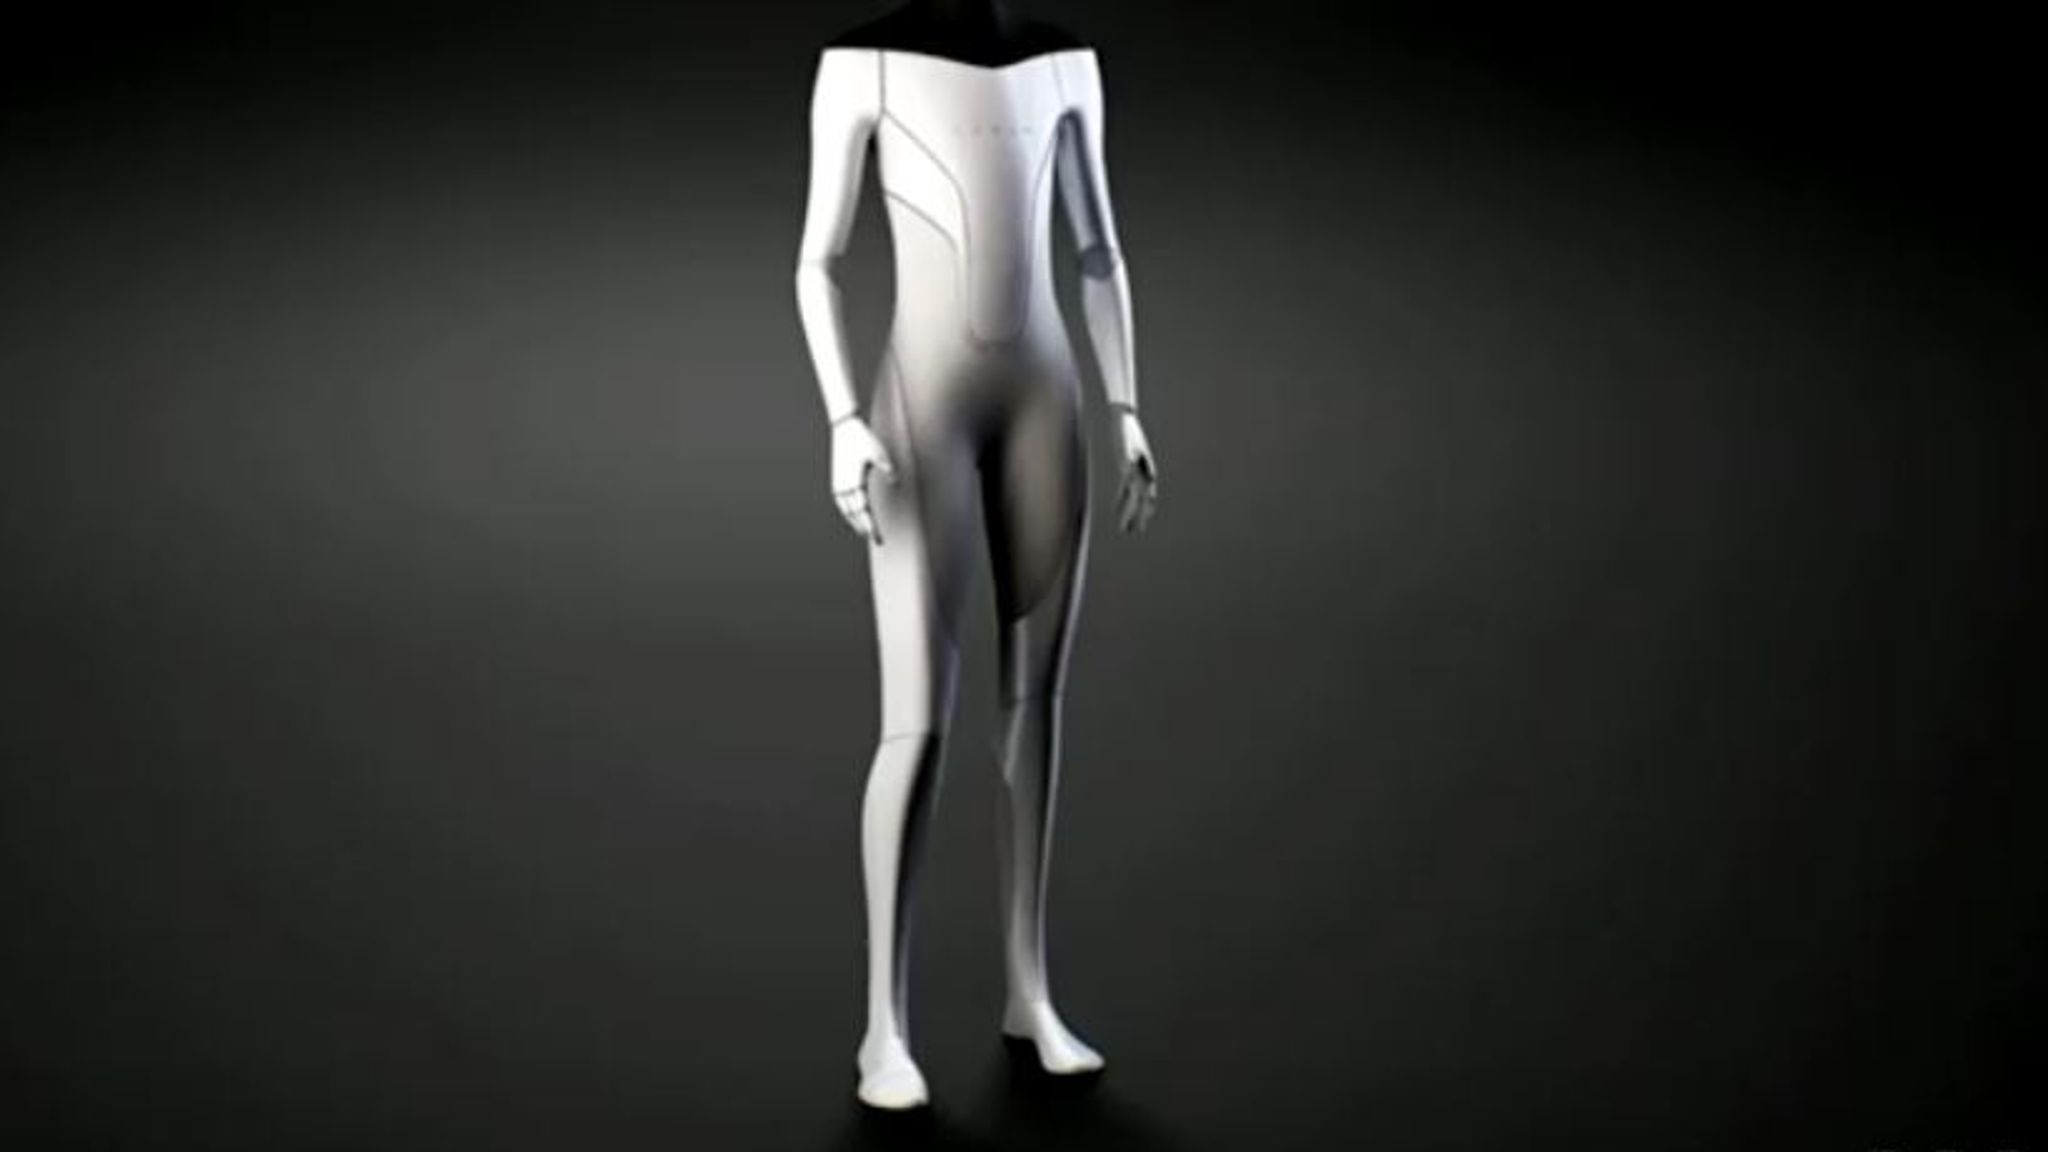 Tesla Previews Robot with Human in Spandex Suit